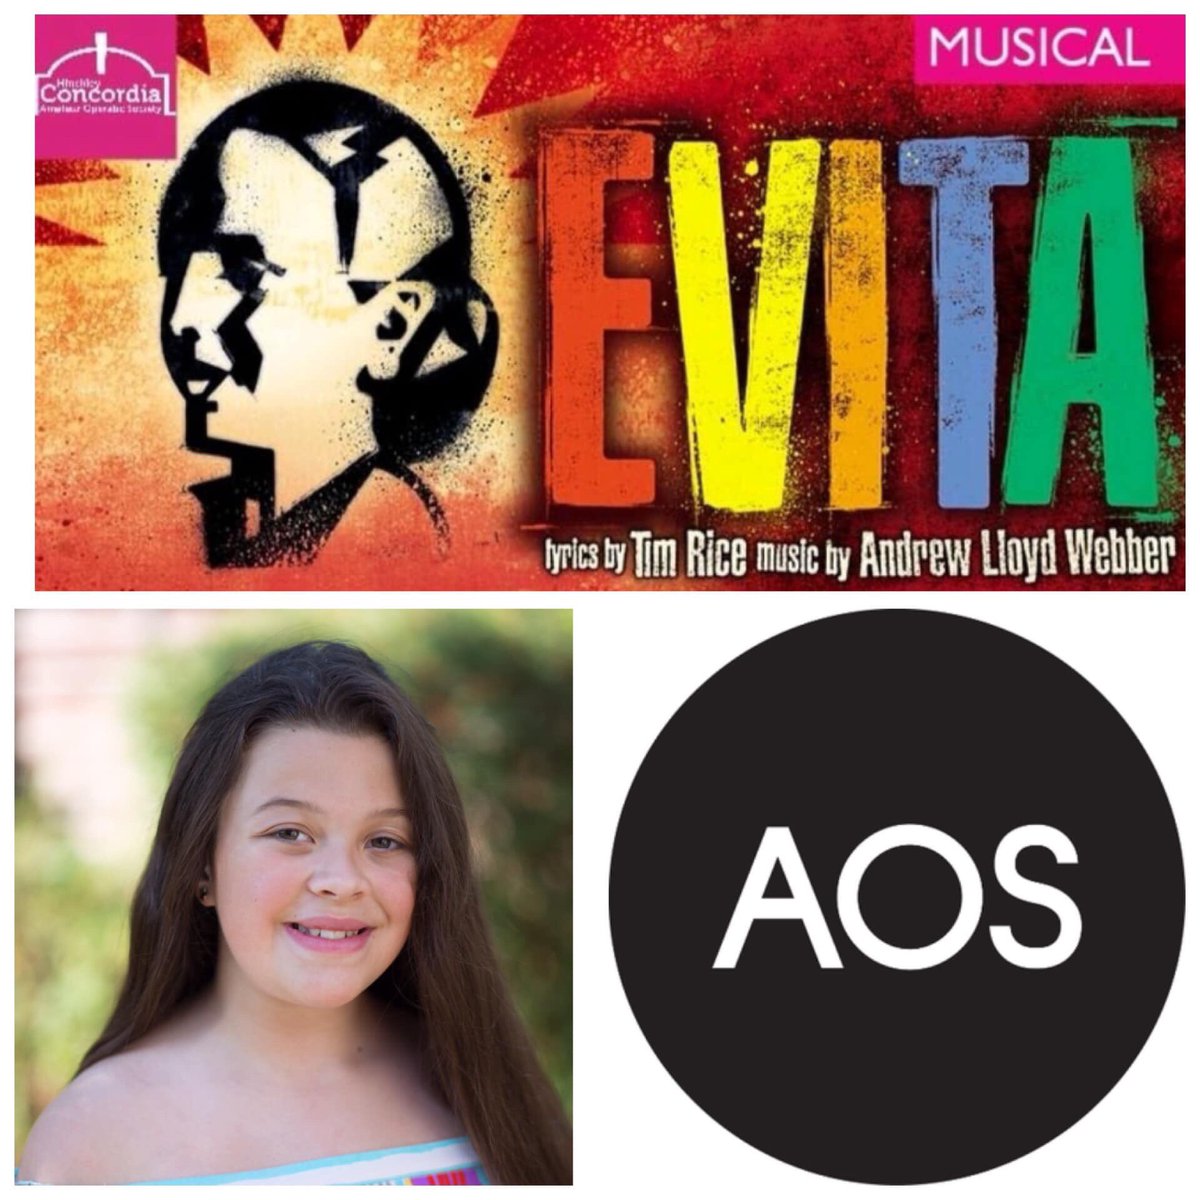 Congratulations to Olivia Bevington who will be appearing in Evita at the Concordia Theatre in November 🎉🎤💖🌟 Well done - looking forward to watching 🥰🥰 #Evita #youngperformers #Hinckley #Dance #Leicestershire #musicaltheatre